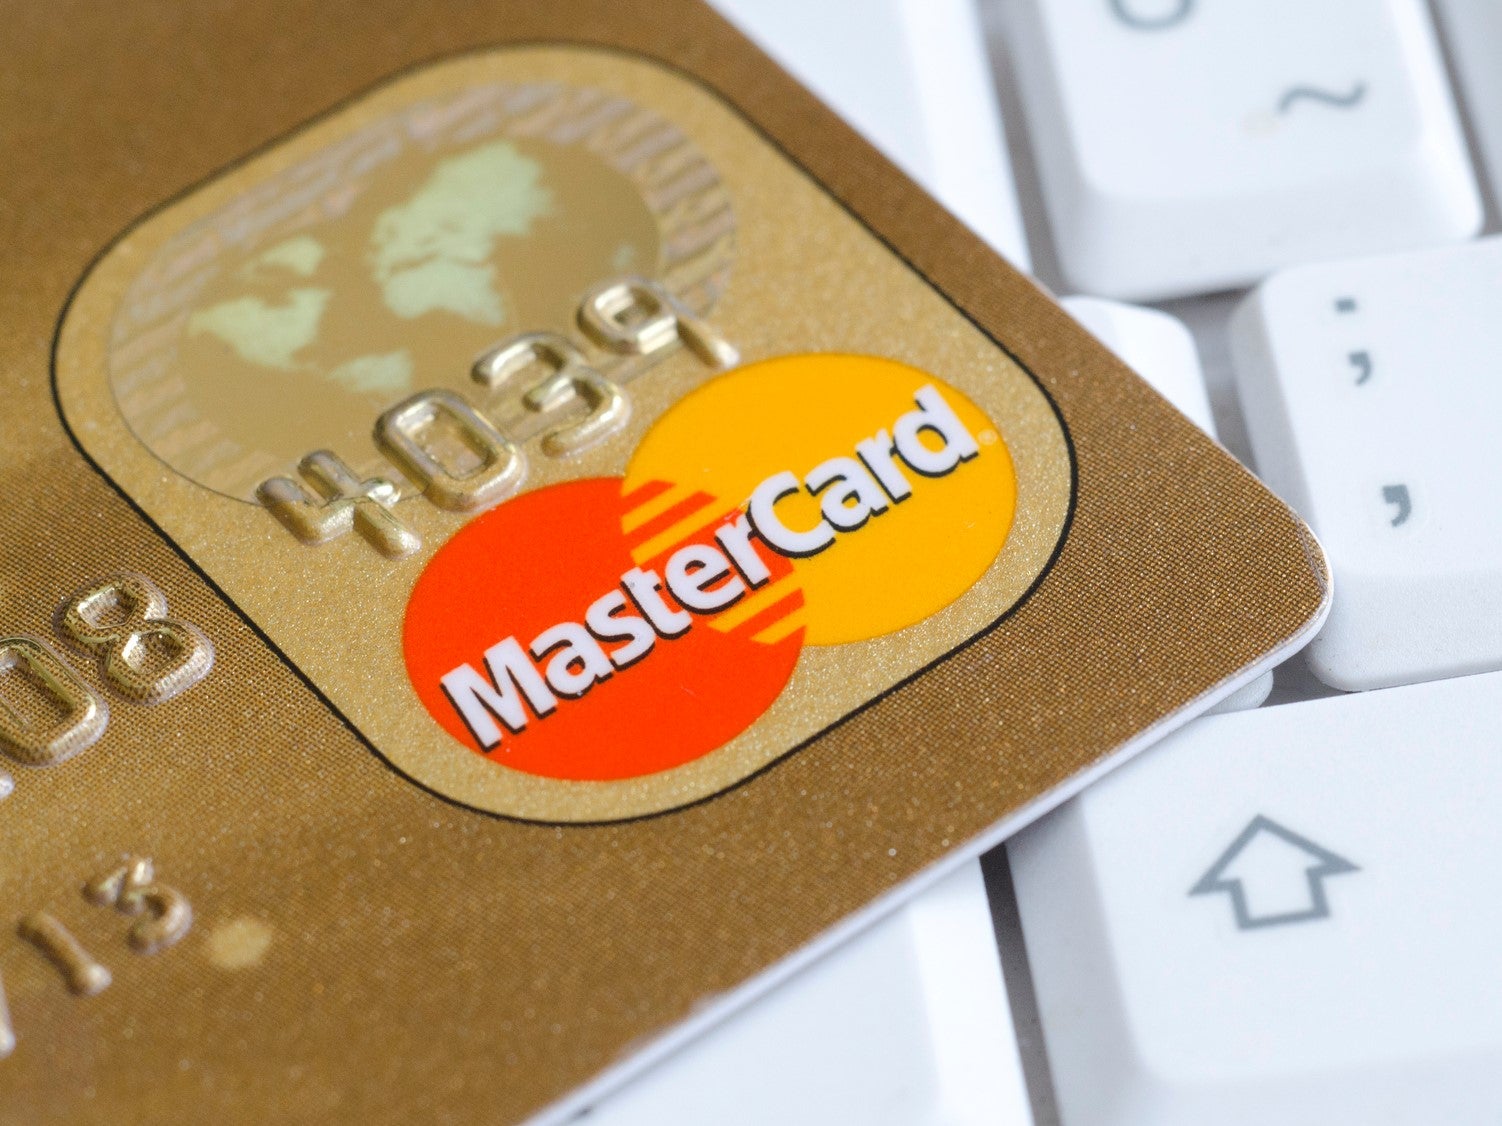 Mastercard is opening up its payments network to certain cryptocurrencies